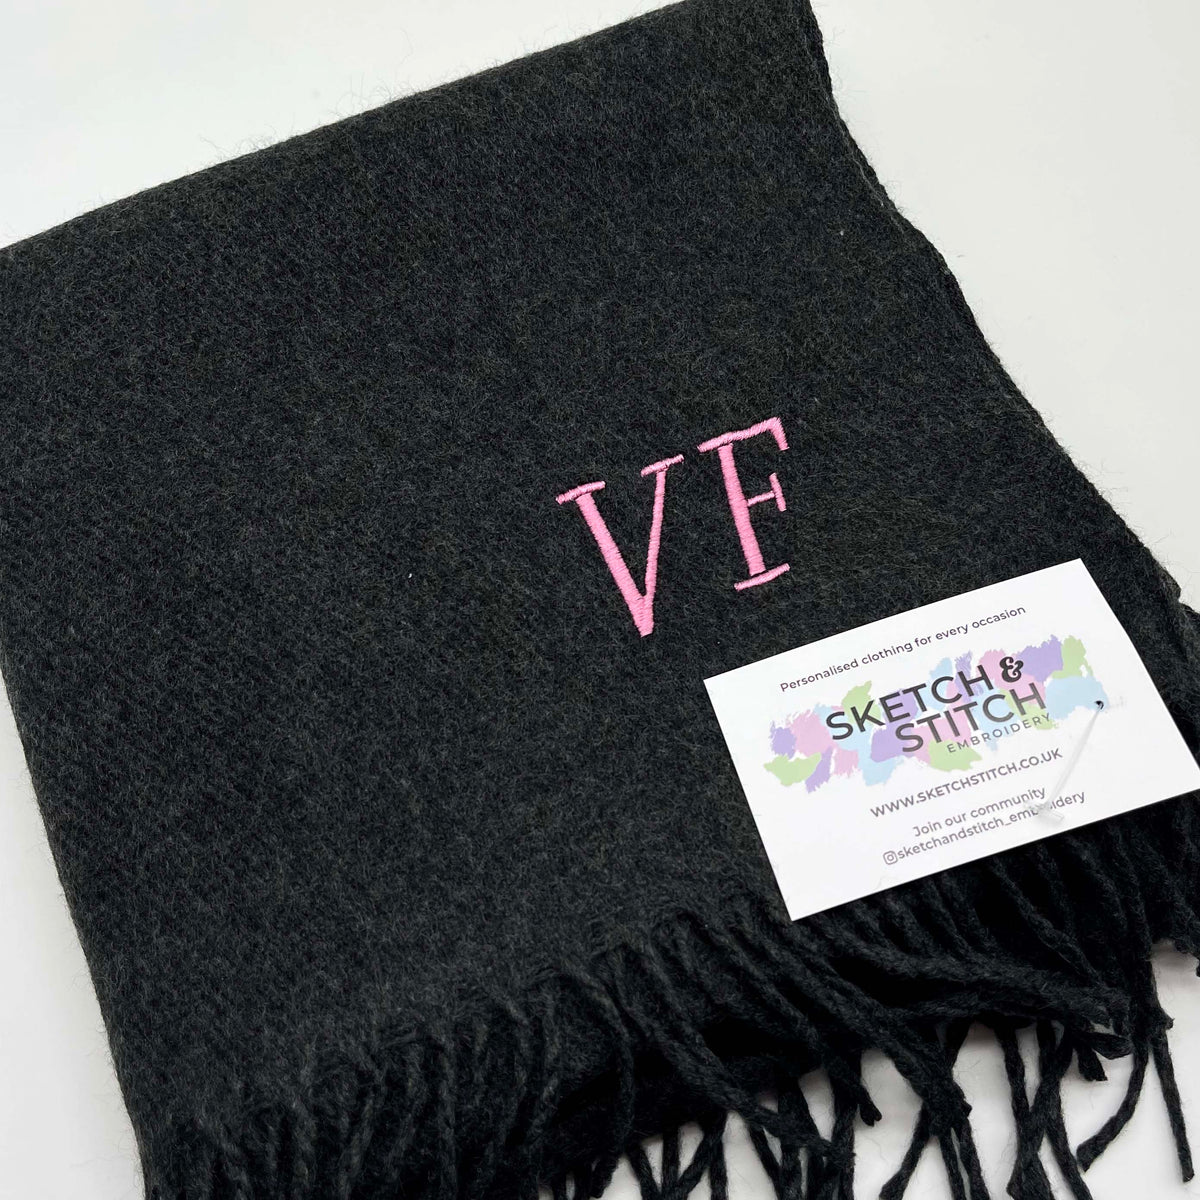 Unisex classic woven scarf personalised initials